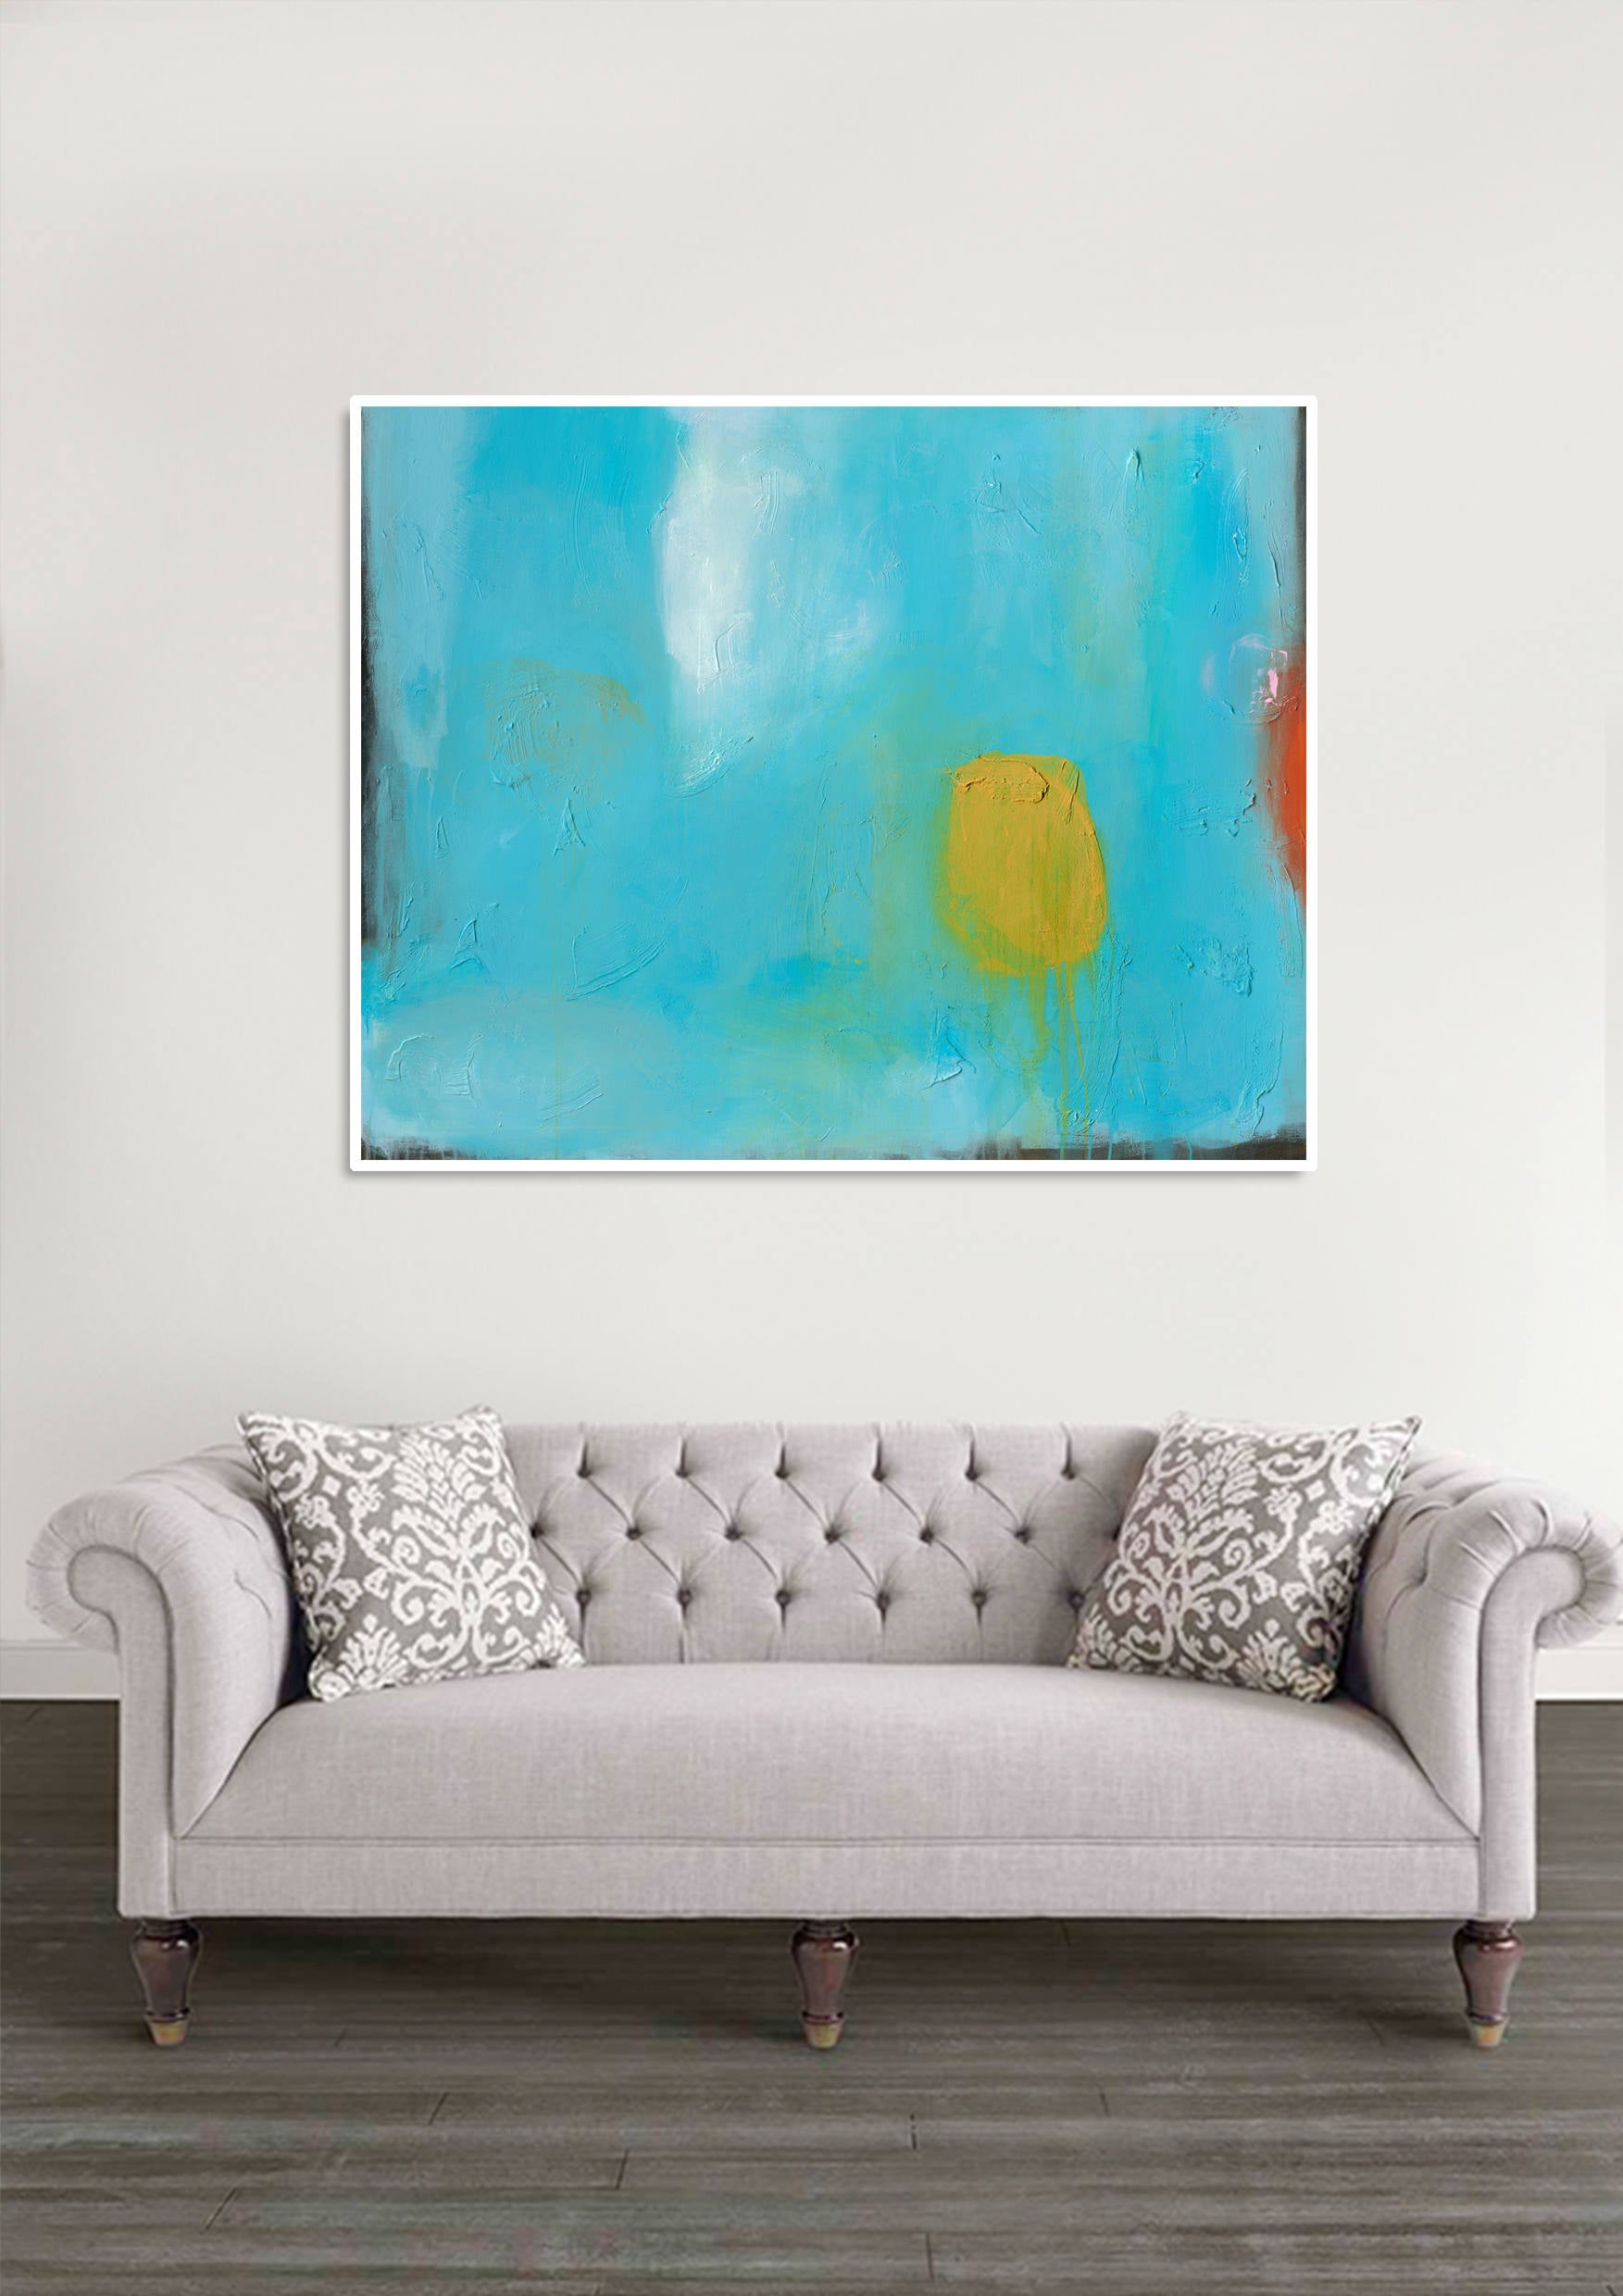 Large wall art, extra large print, Blue Acrylic canvas art Giclee of Original Wall Art, abstract wall art, large abstract art, CamiloMattis - camilomattis.com